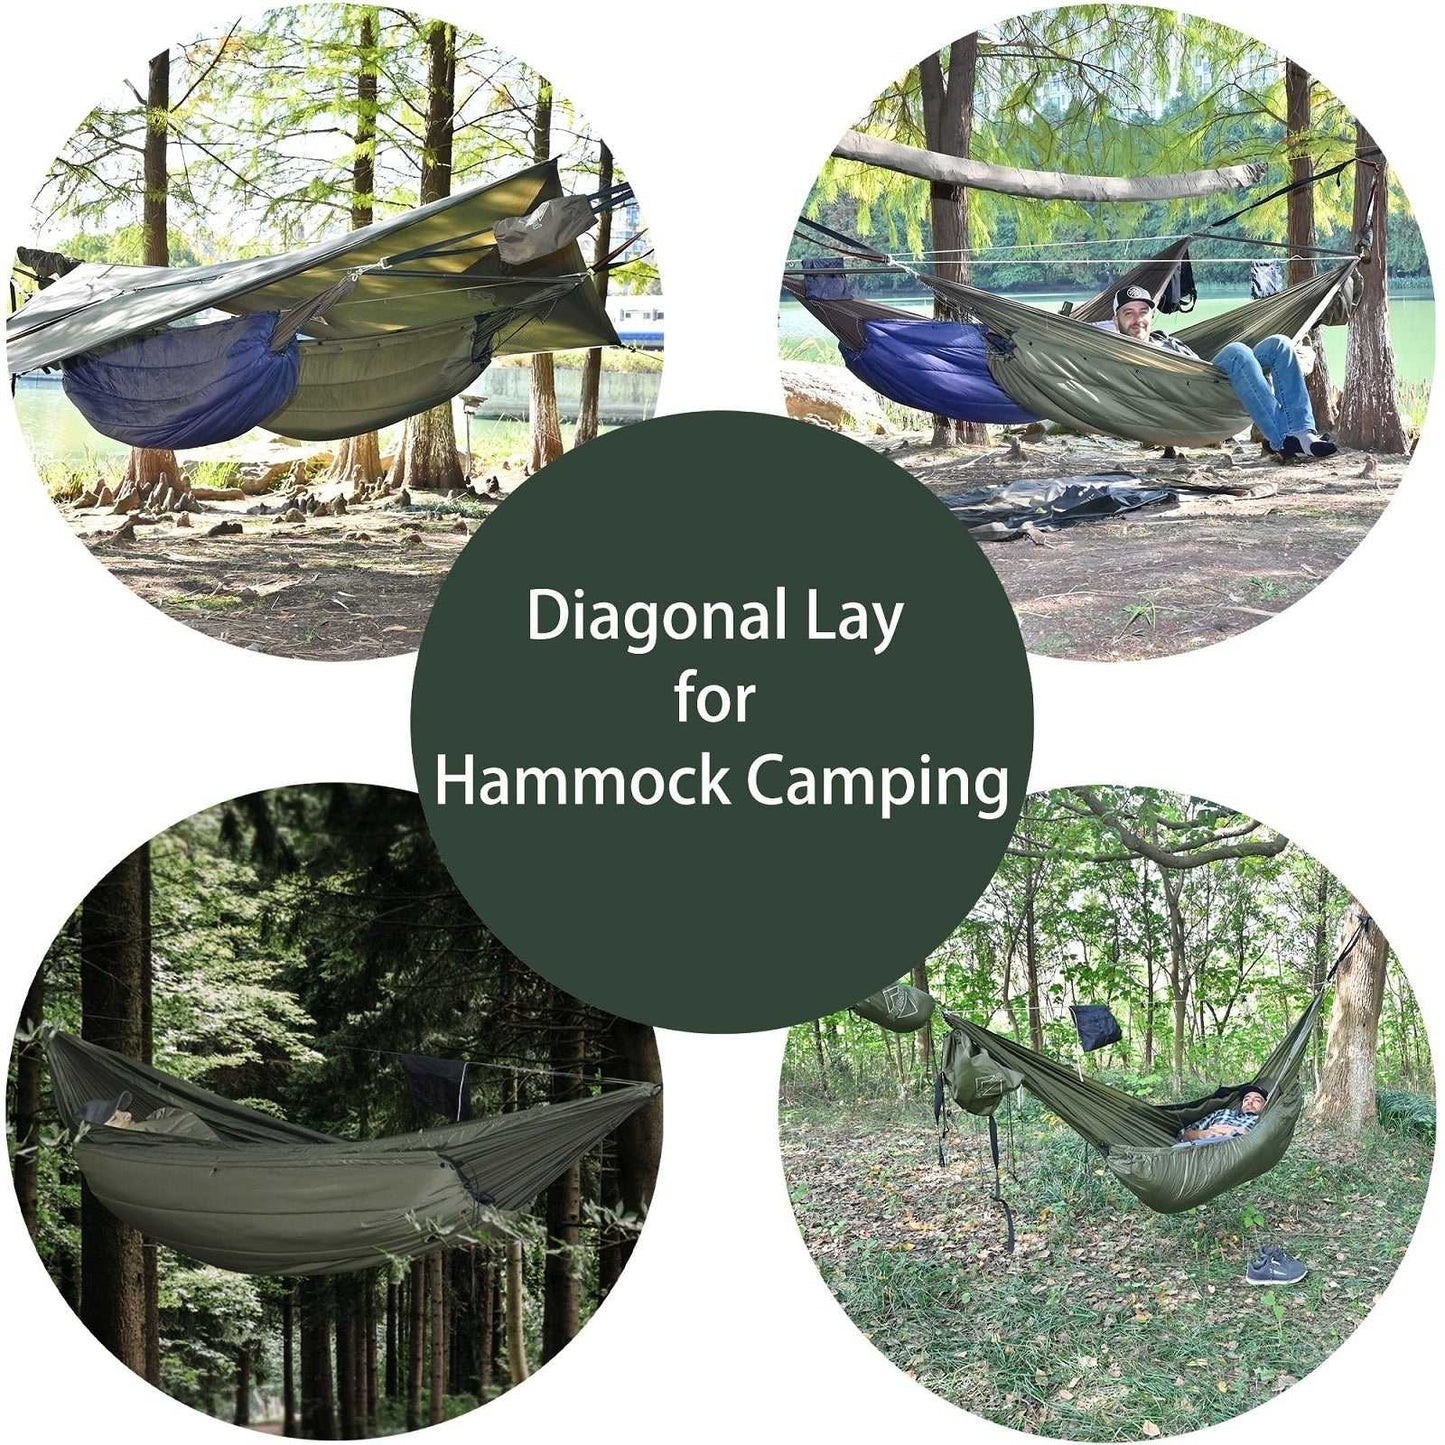 Hammock Camping | Onewind Outdoors